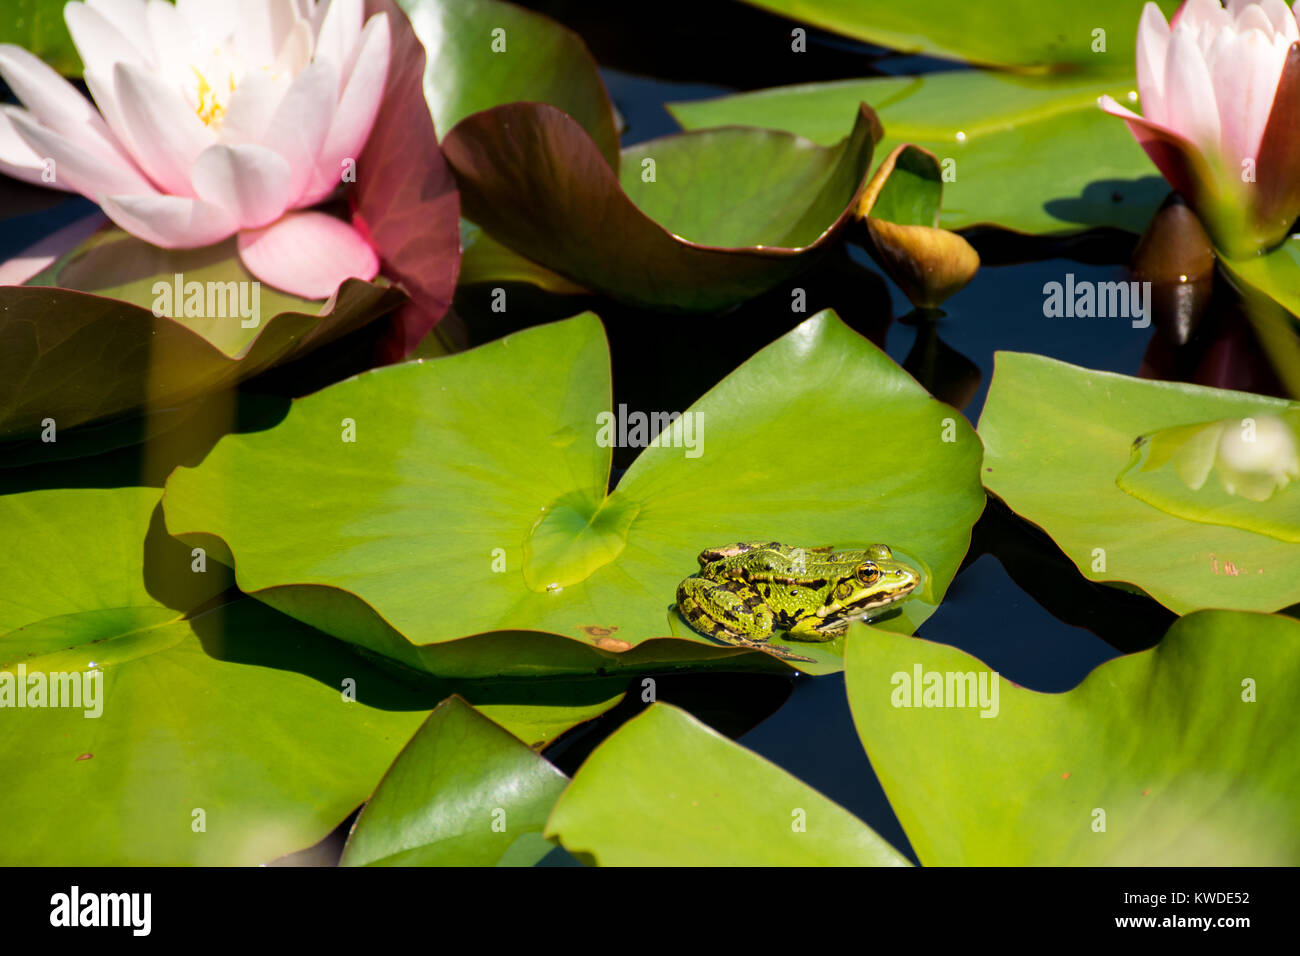 Green frog named Pelophylax kl. esculentus with brown stains sitting on the green lily leaf Stock Photo